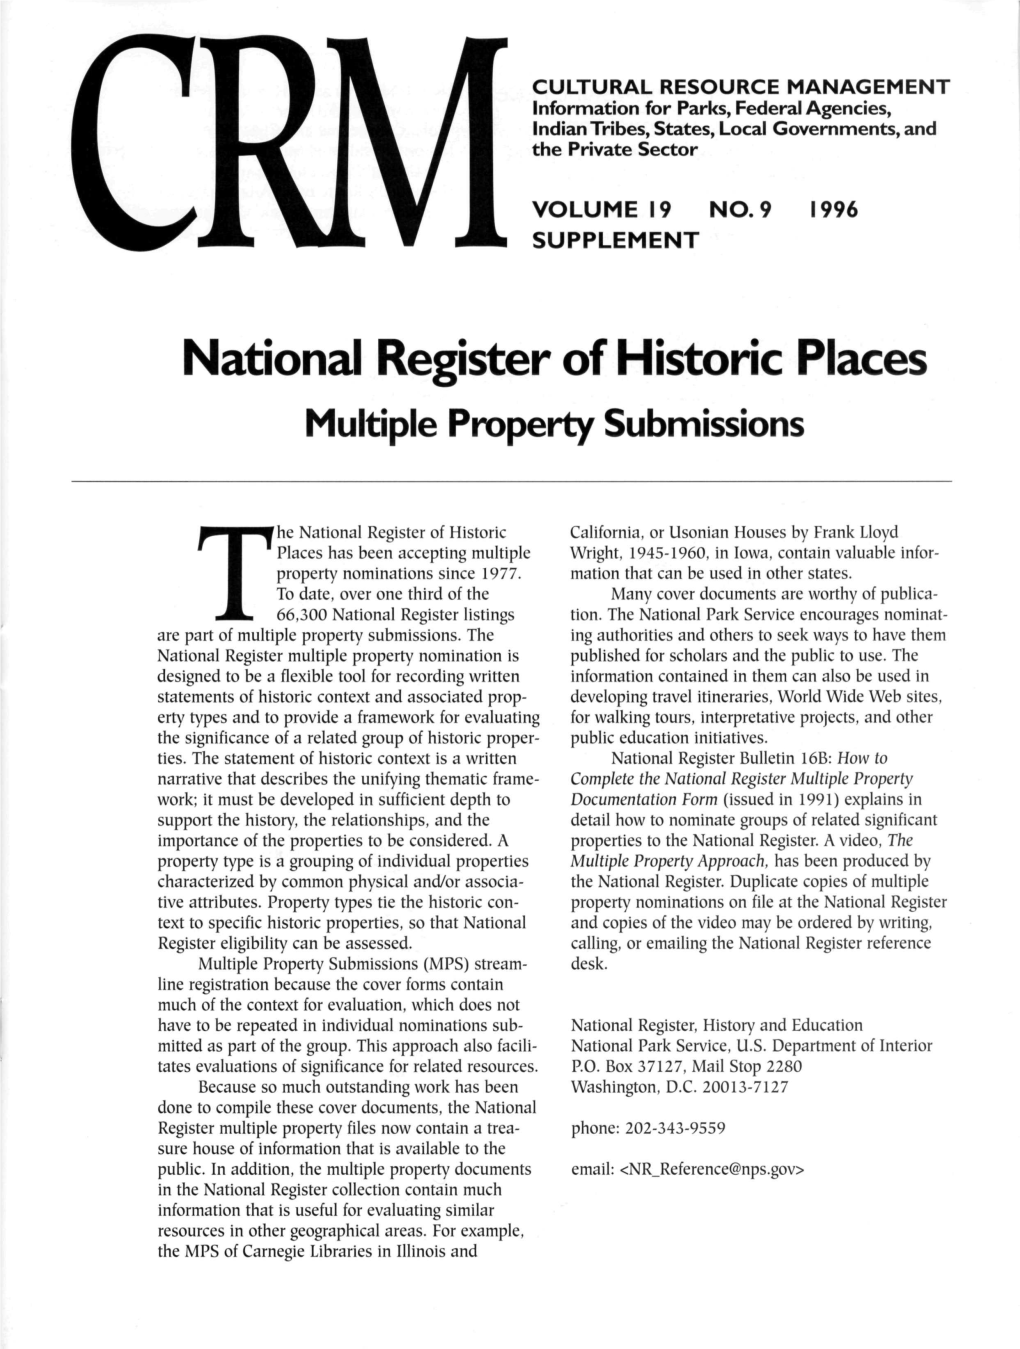 National Register of Historic Places Multiple Property Submissions